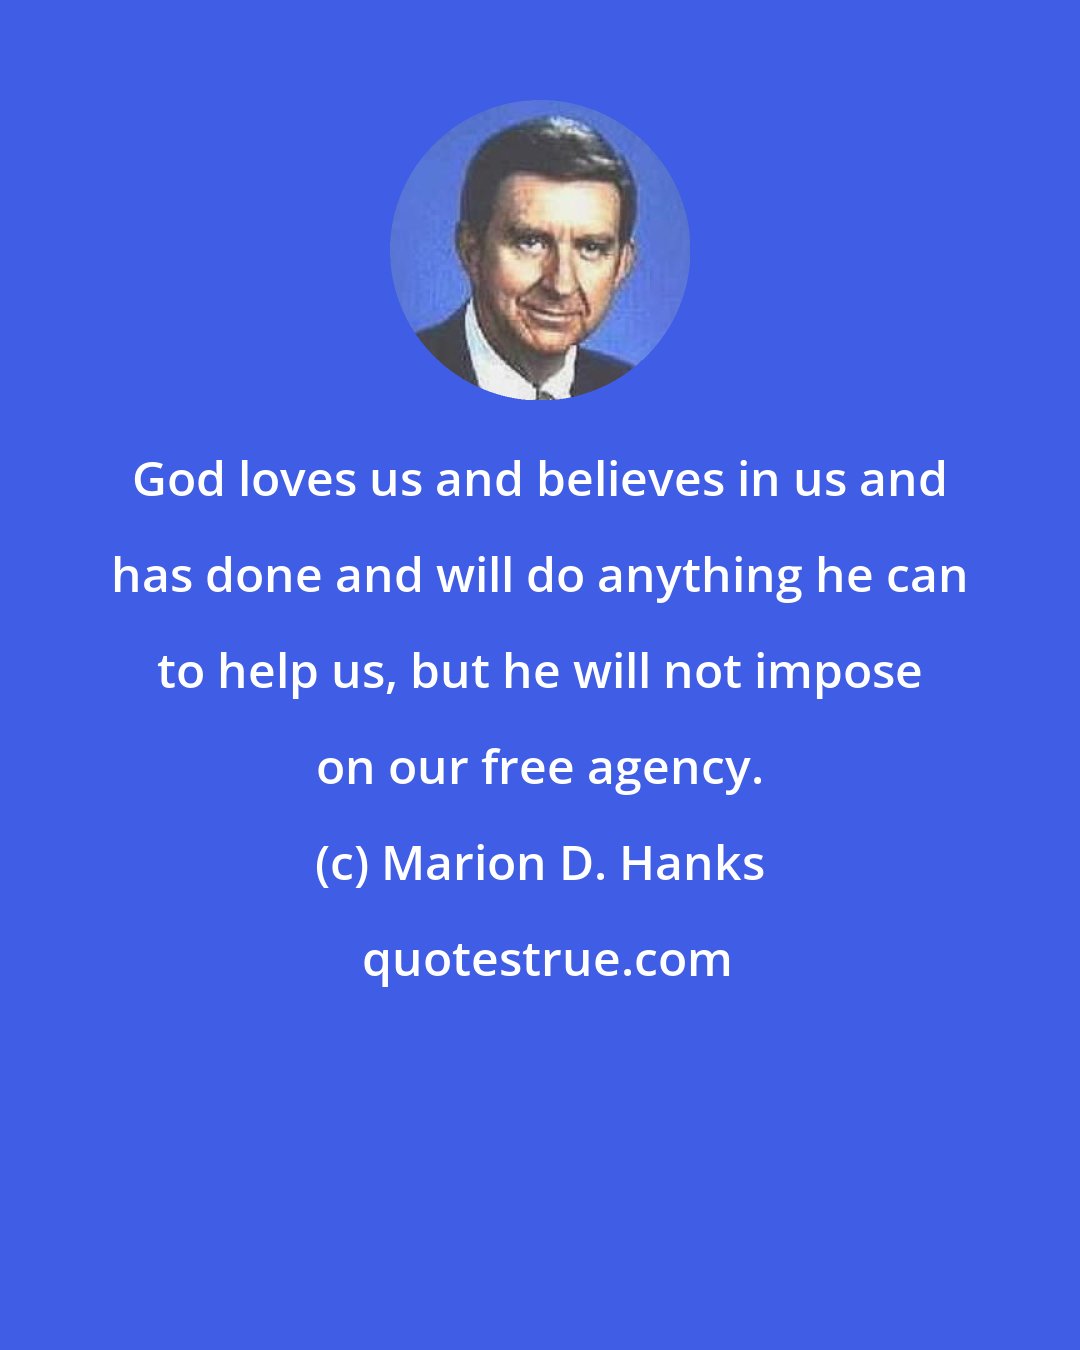 Marion D. Hanks: God loves us and believes in us and has done and will do anything he can to help us, but he will not impose on our free agency.